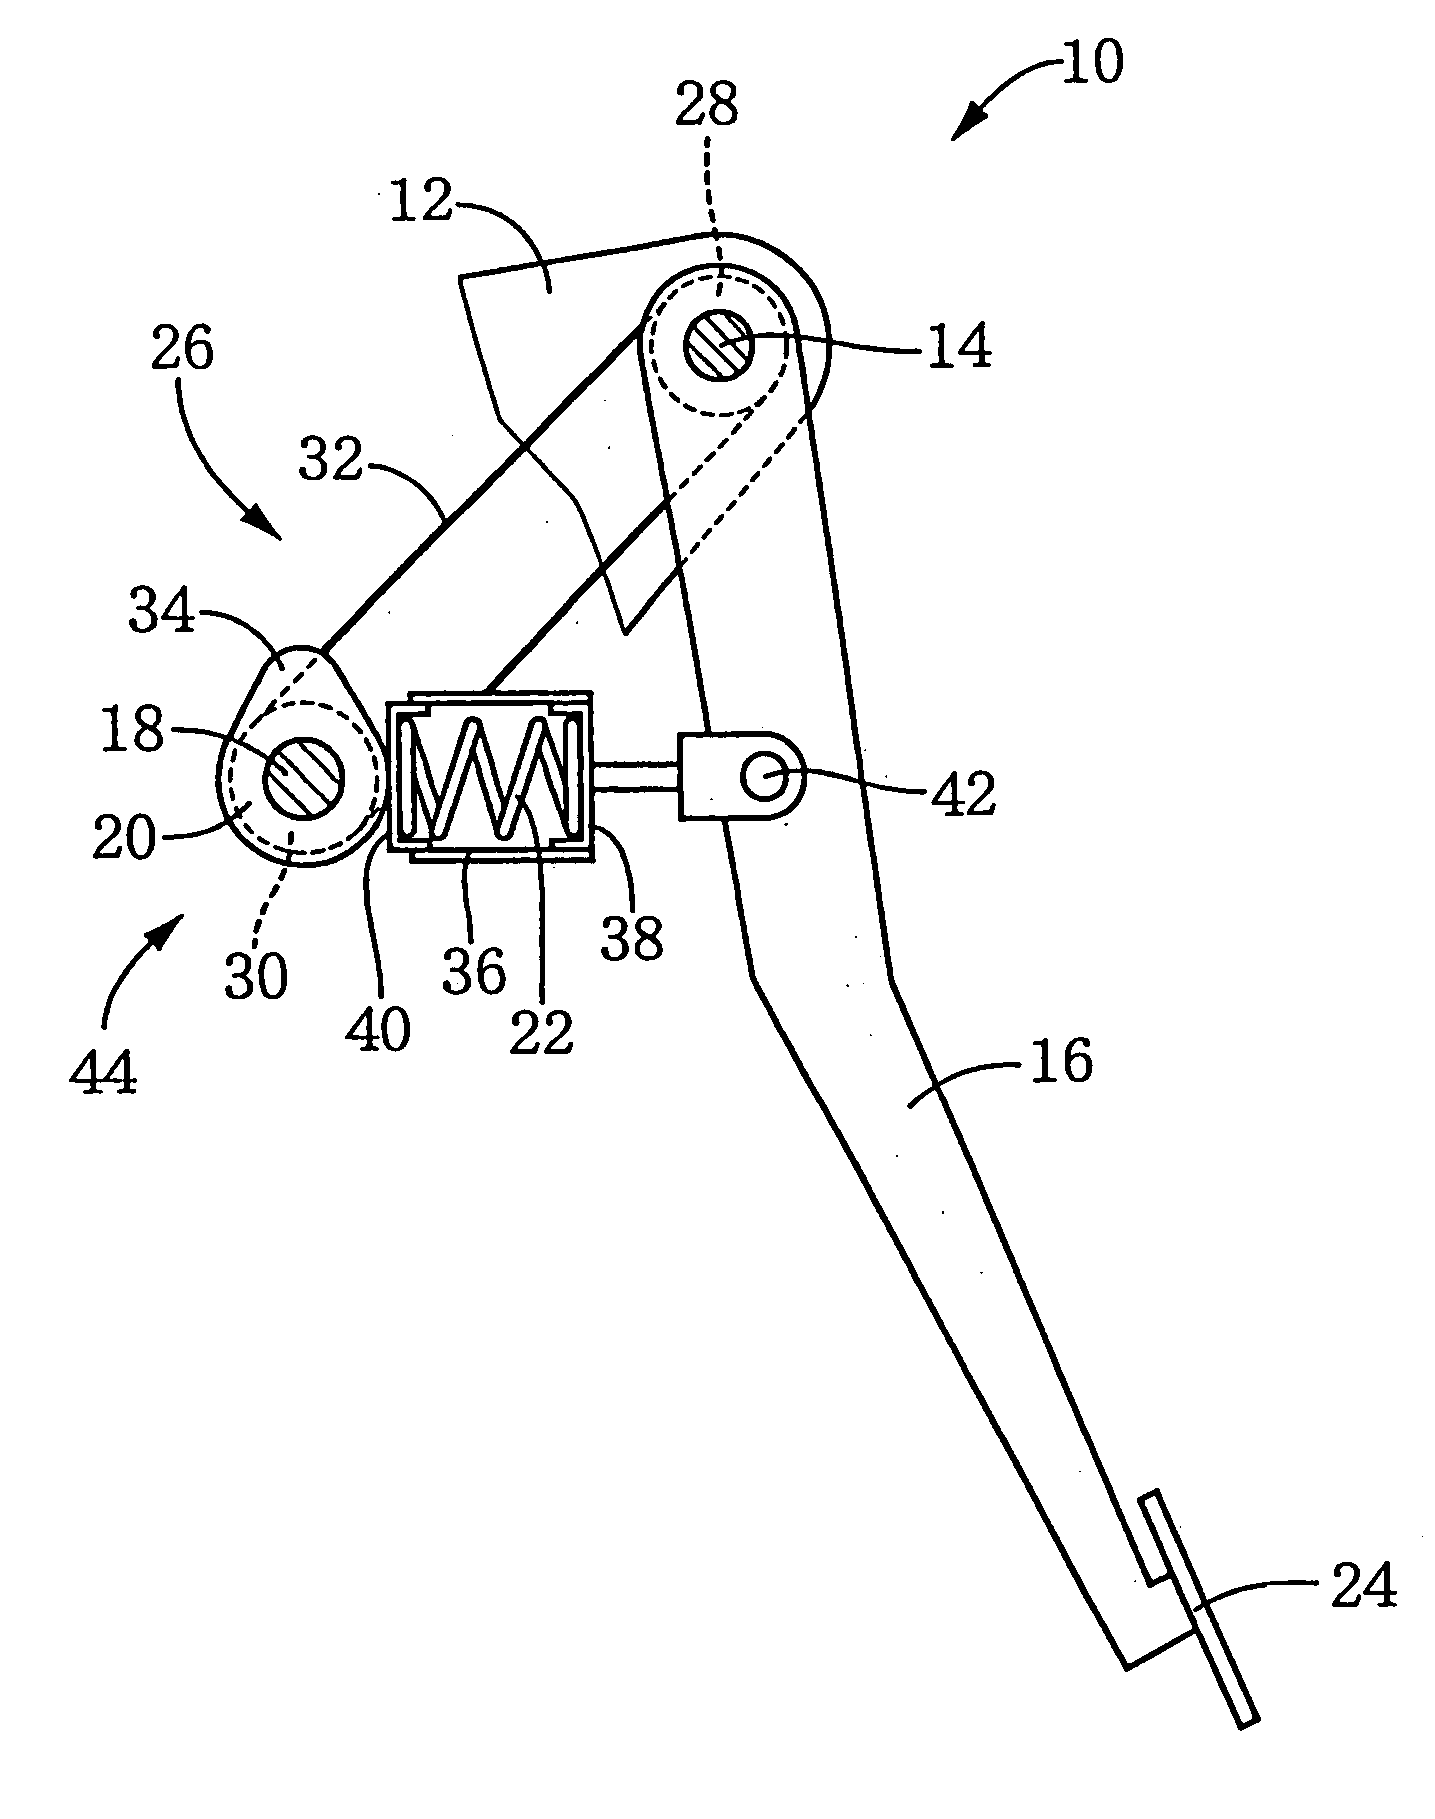 Apparatus for applying a reaction force to a pivotally supported pedal member upon depression thereof